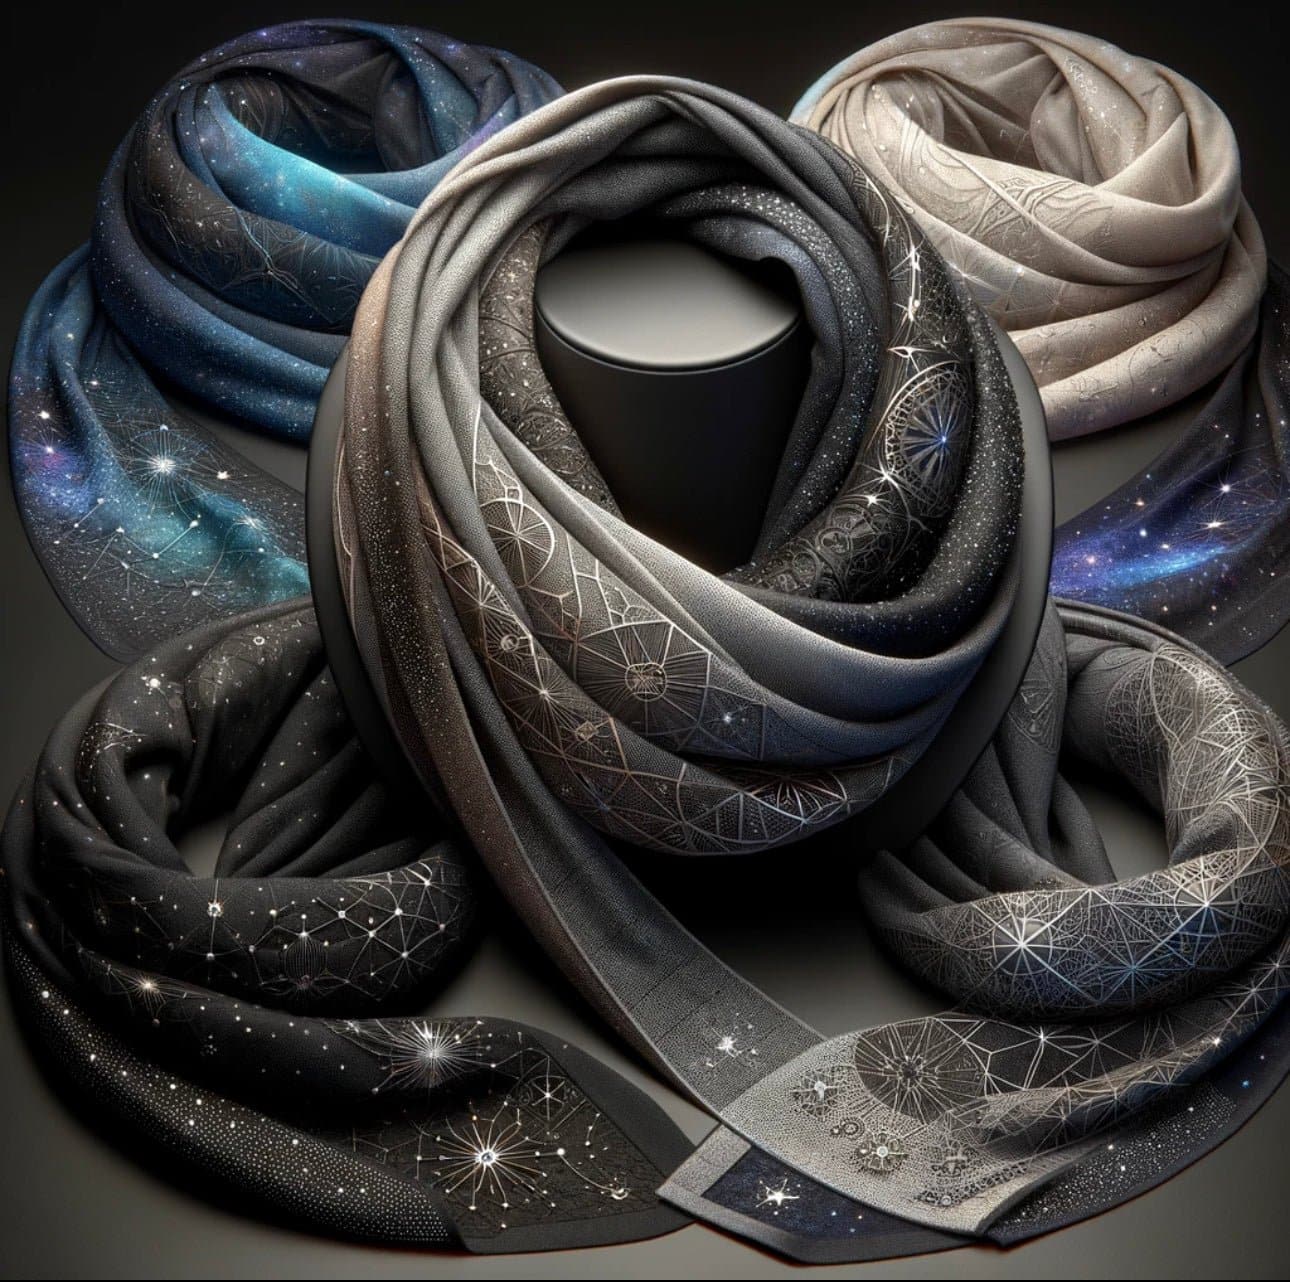 Infinity Scarf - Exici